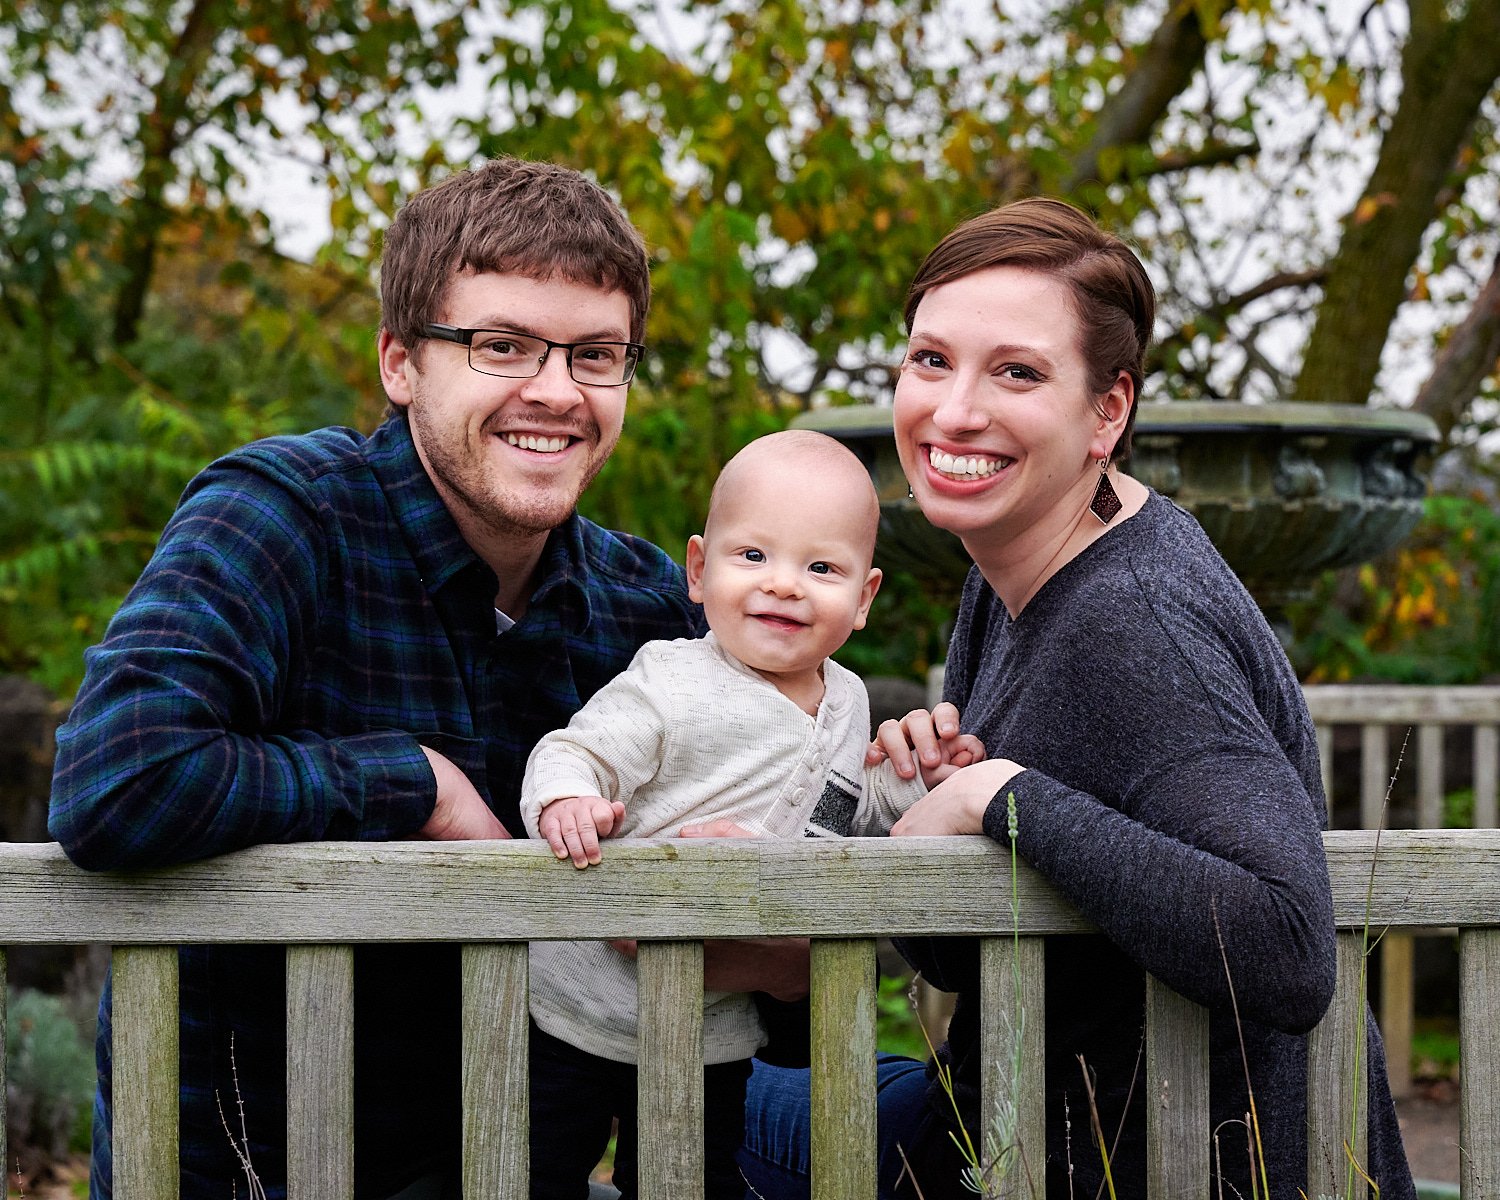  Leanne Elliott is posing with her bespectacled husband and a smiling 9 month old son in front of Phipps Conservatory and Botanical Gardens of Pittsburgh, PA. The family is dressed in a checked shirt. 